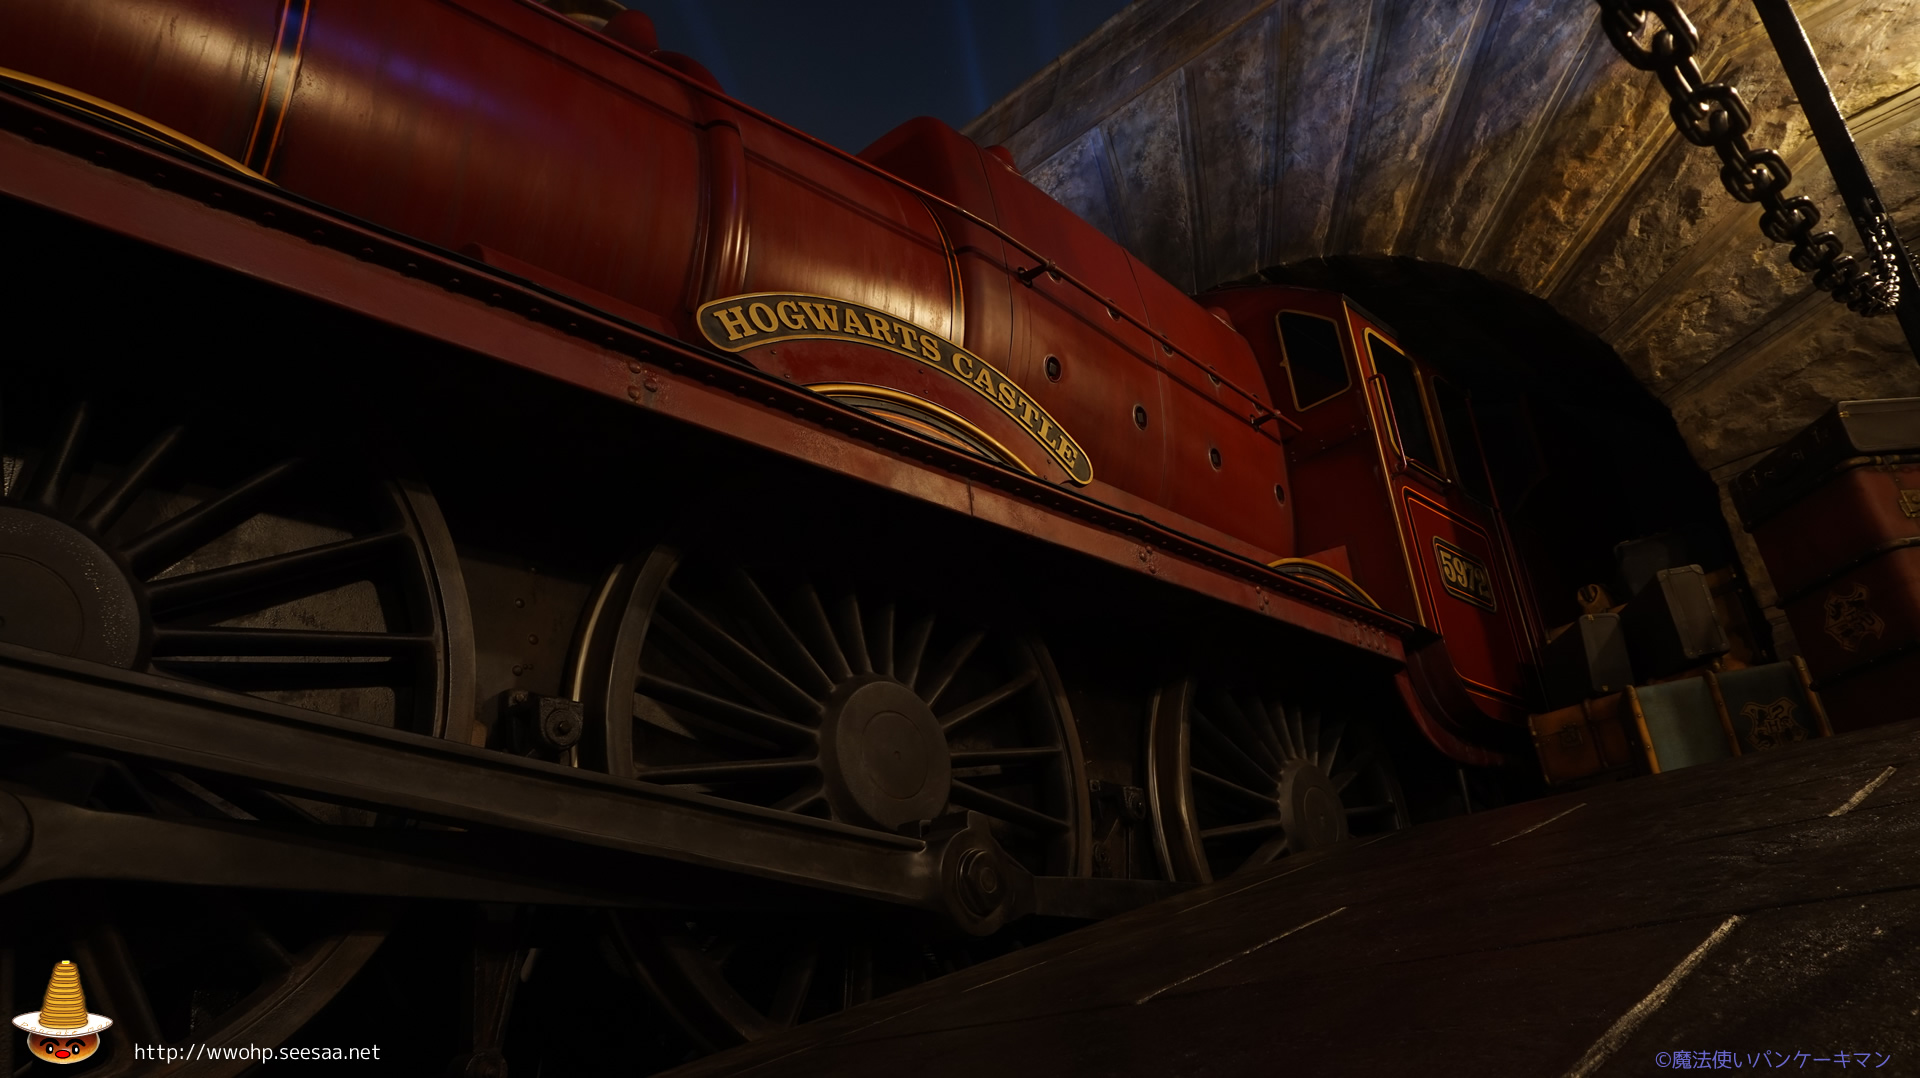 Hogwarts Express at night Hogwarts Express at WWOHP in USJ 'Harry Potter Area'